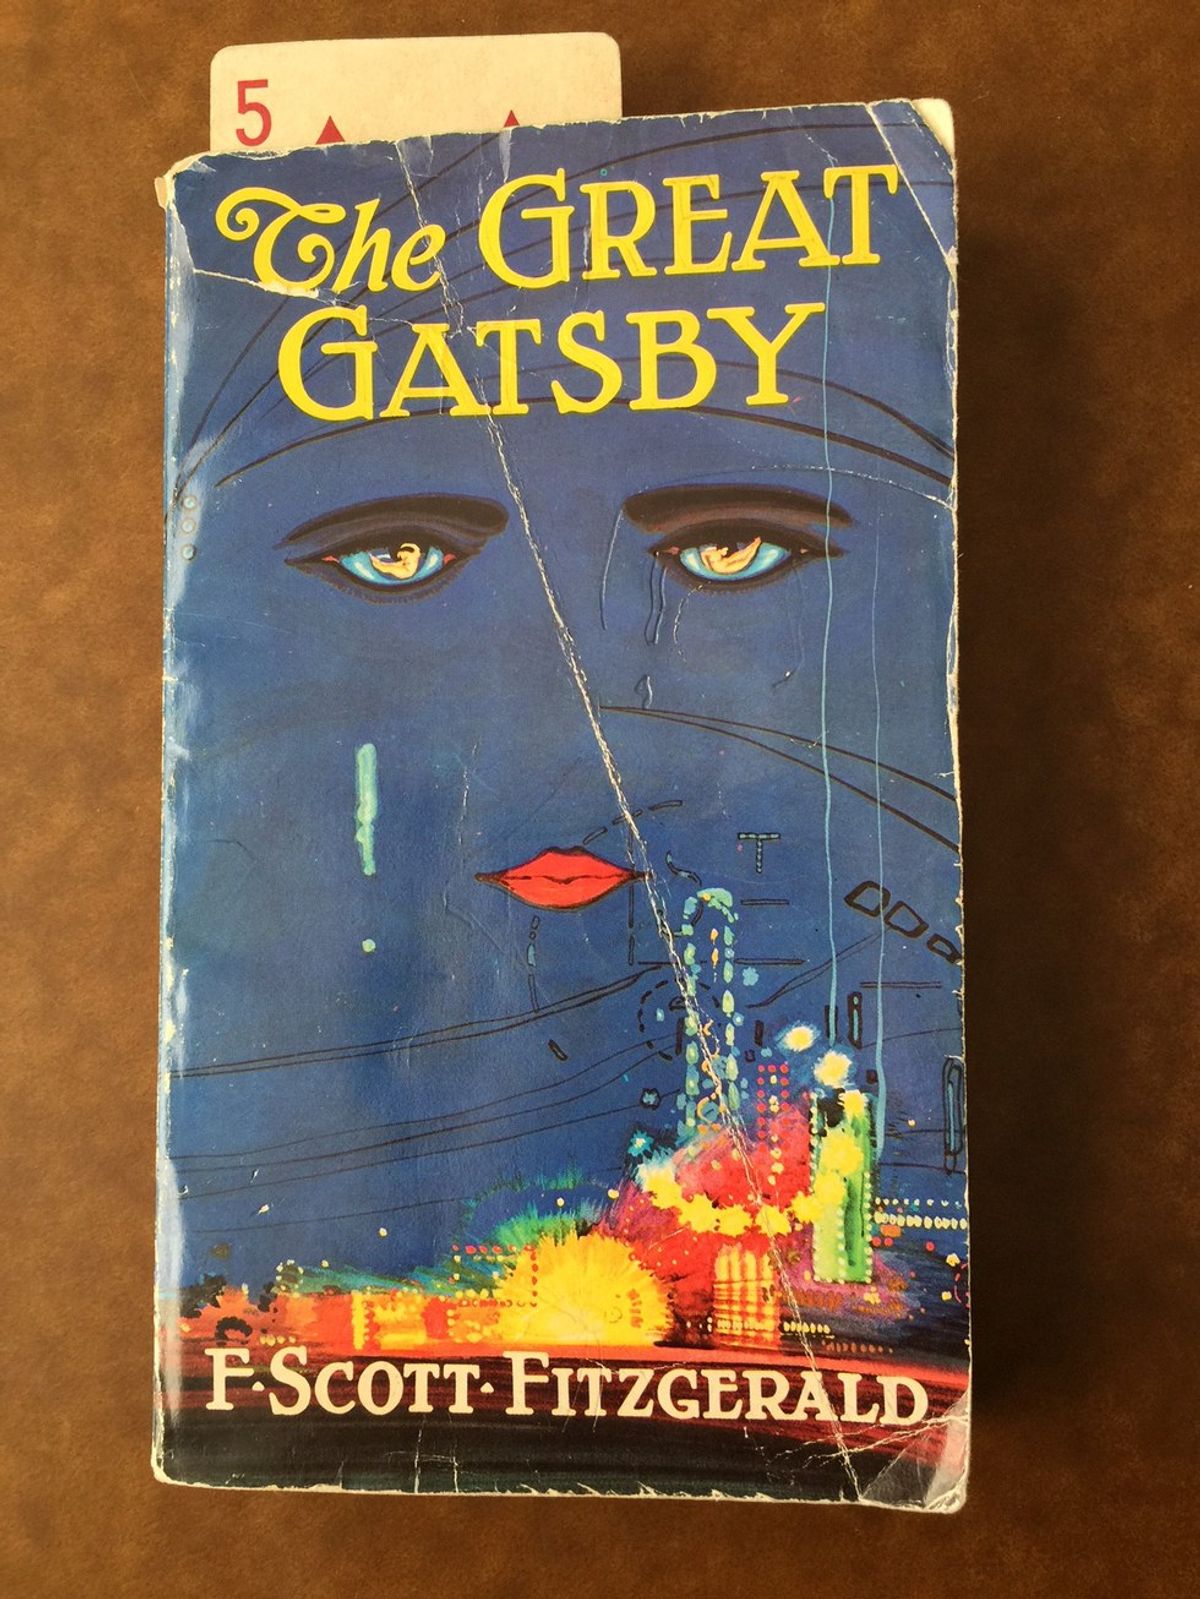 How The Great Gatsby Changed My Life